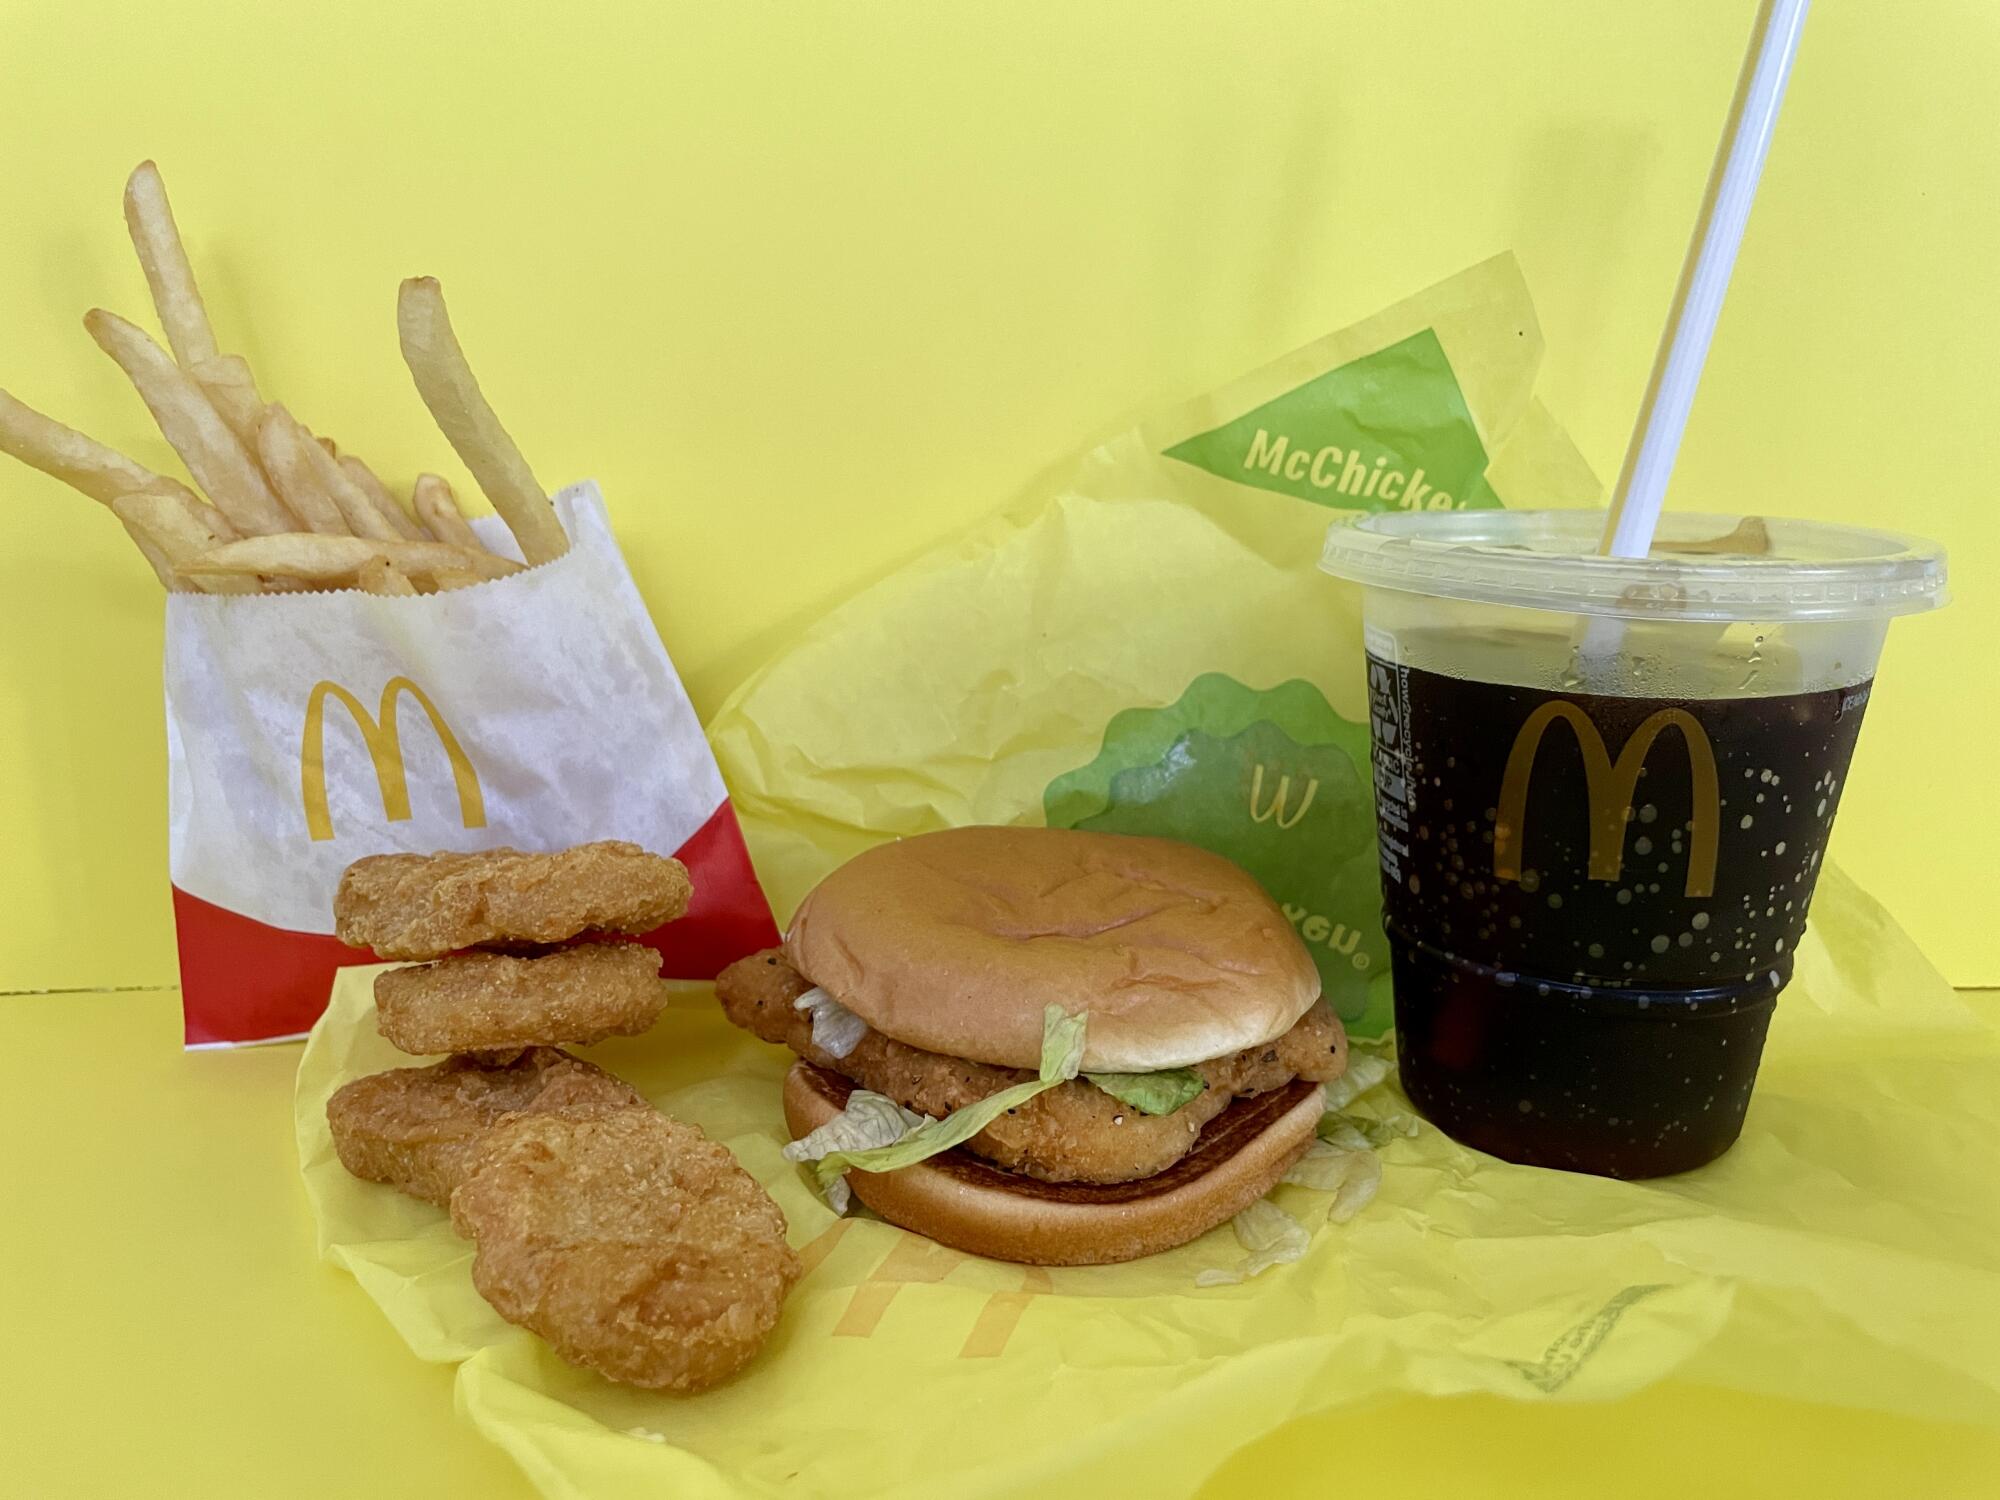 The $5 crispy chicken sandwich meal from McDonald's